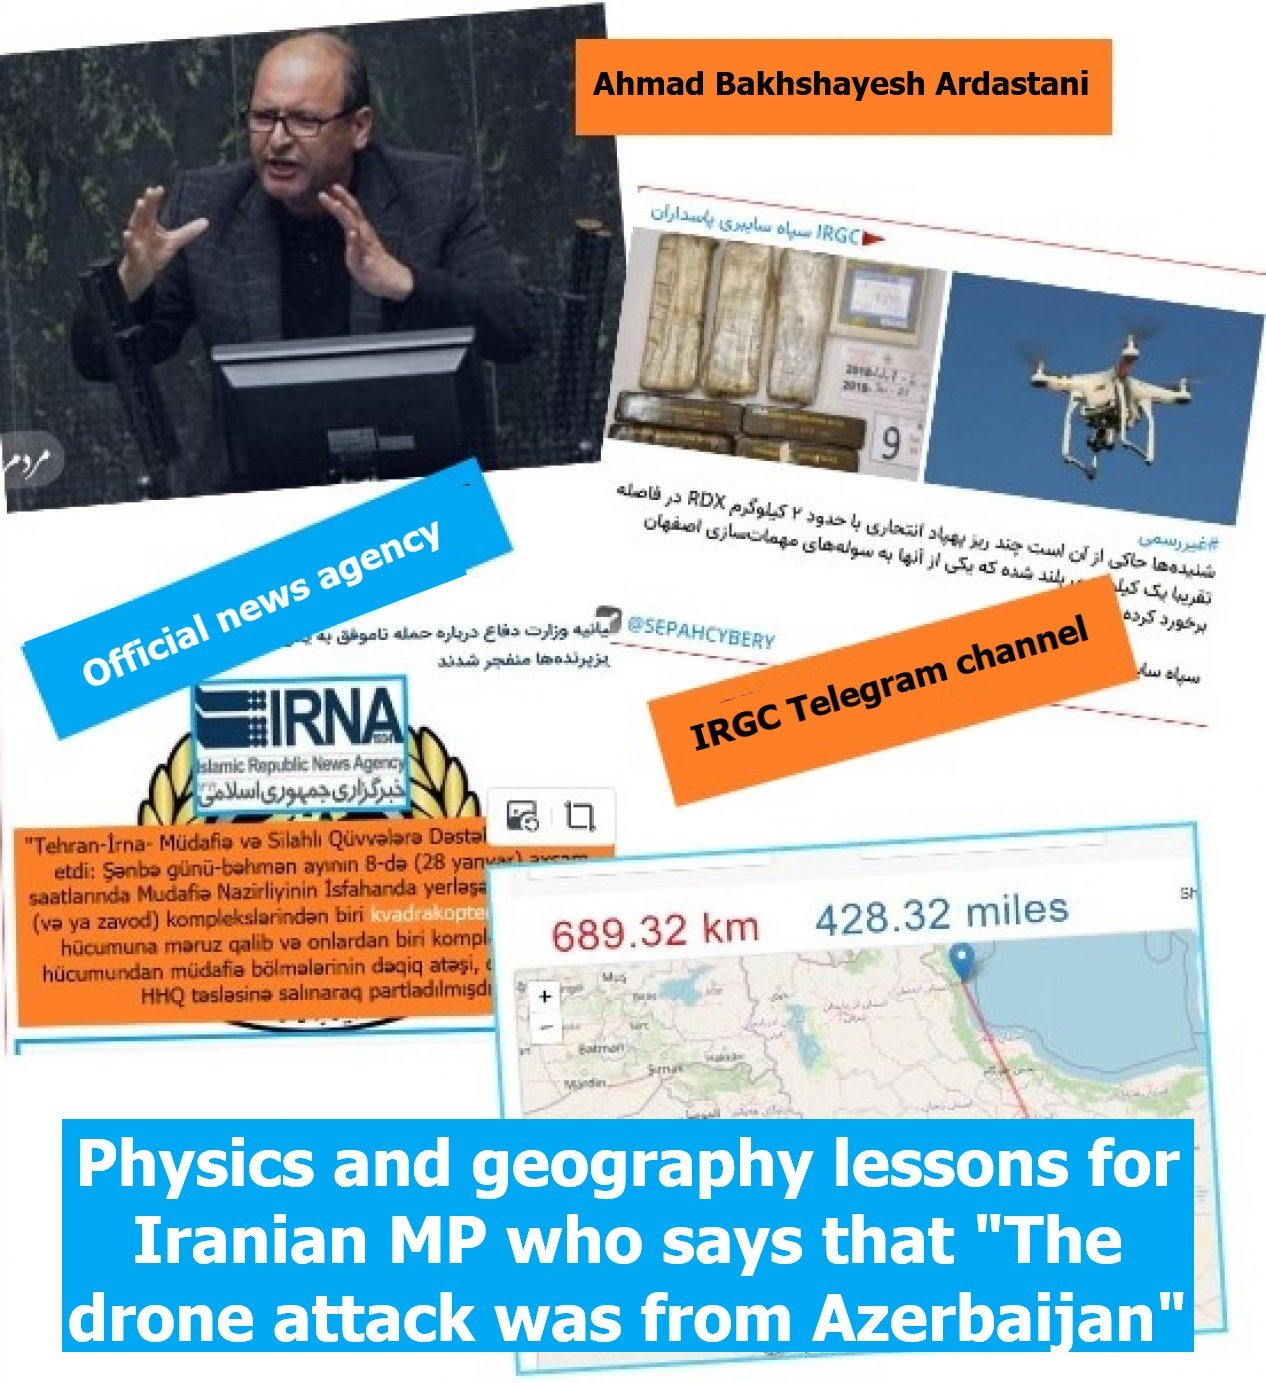 Iranian MP who said "Drone attack came from Azerbaijan" is lying - Proof with facts